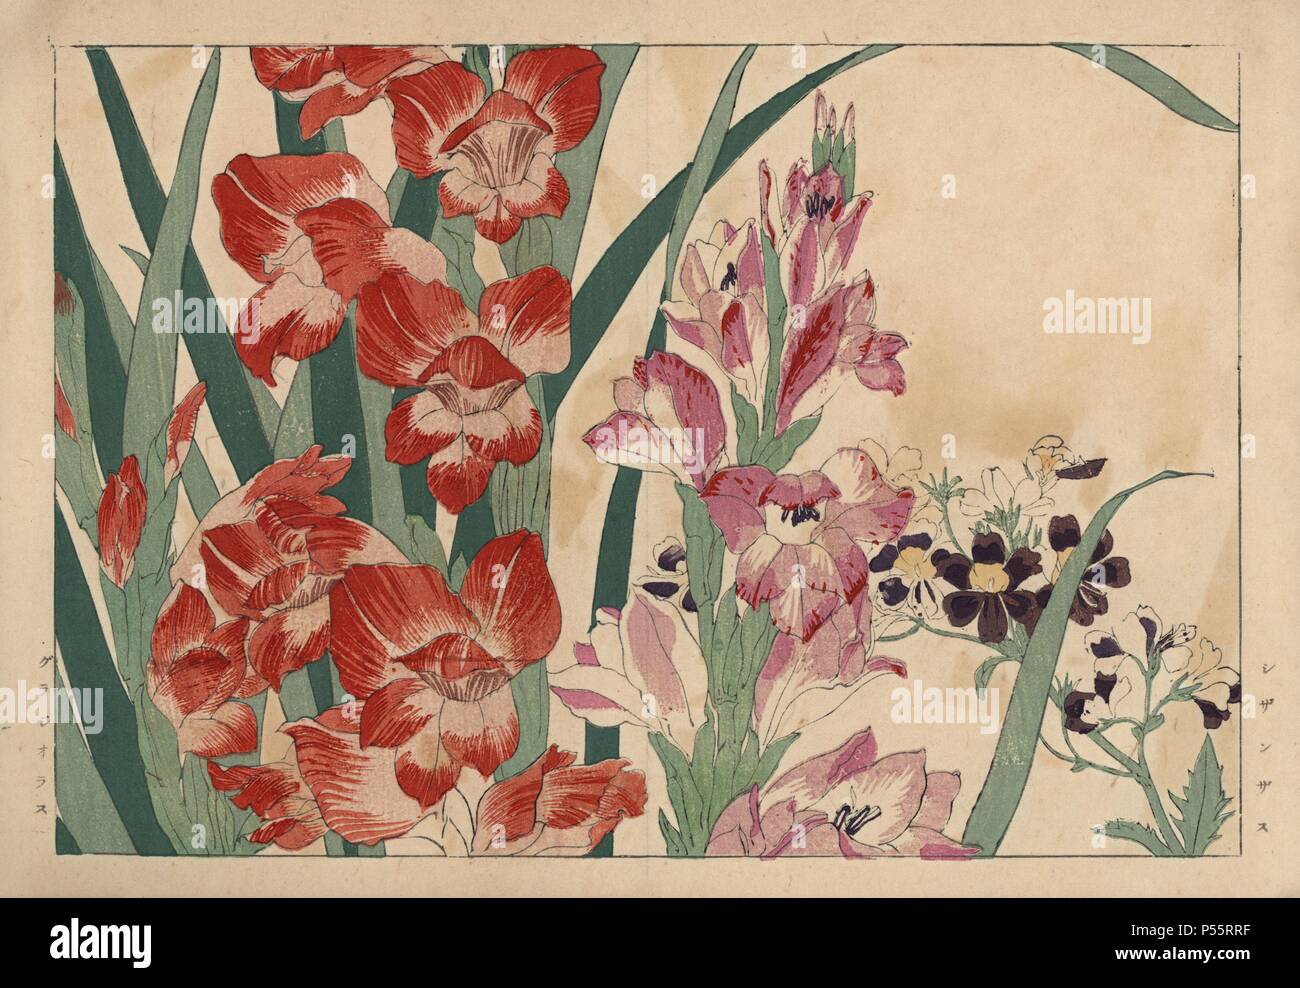 Poor man's orchid, Schizanthus pinnatus, and gladiolus, Gladiolus communis. Handcoloured woodblock print from Konan Tanigami's 'Seiyou Sokazufu' (Pictorial Album of Western Plants and Flowers: Summer), Unsodo, Kyoto, 1917. Tanigami (1879-1928) depicted 125 varieties of garden plants through the four seasons. Stock Photo